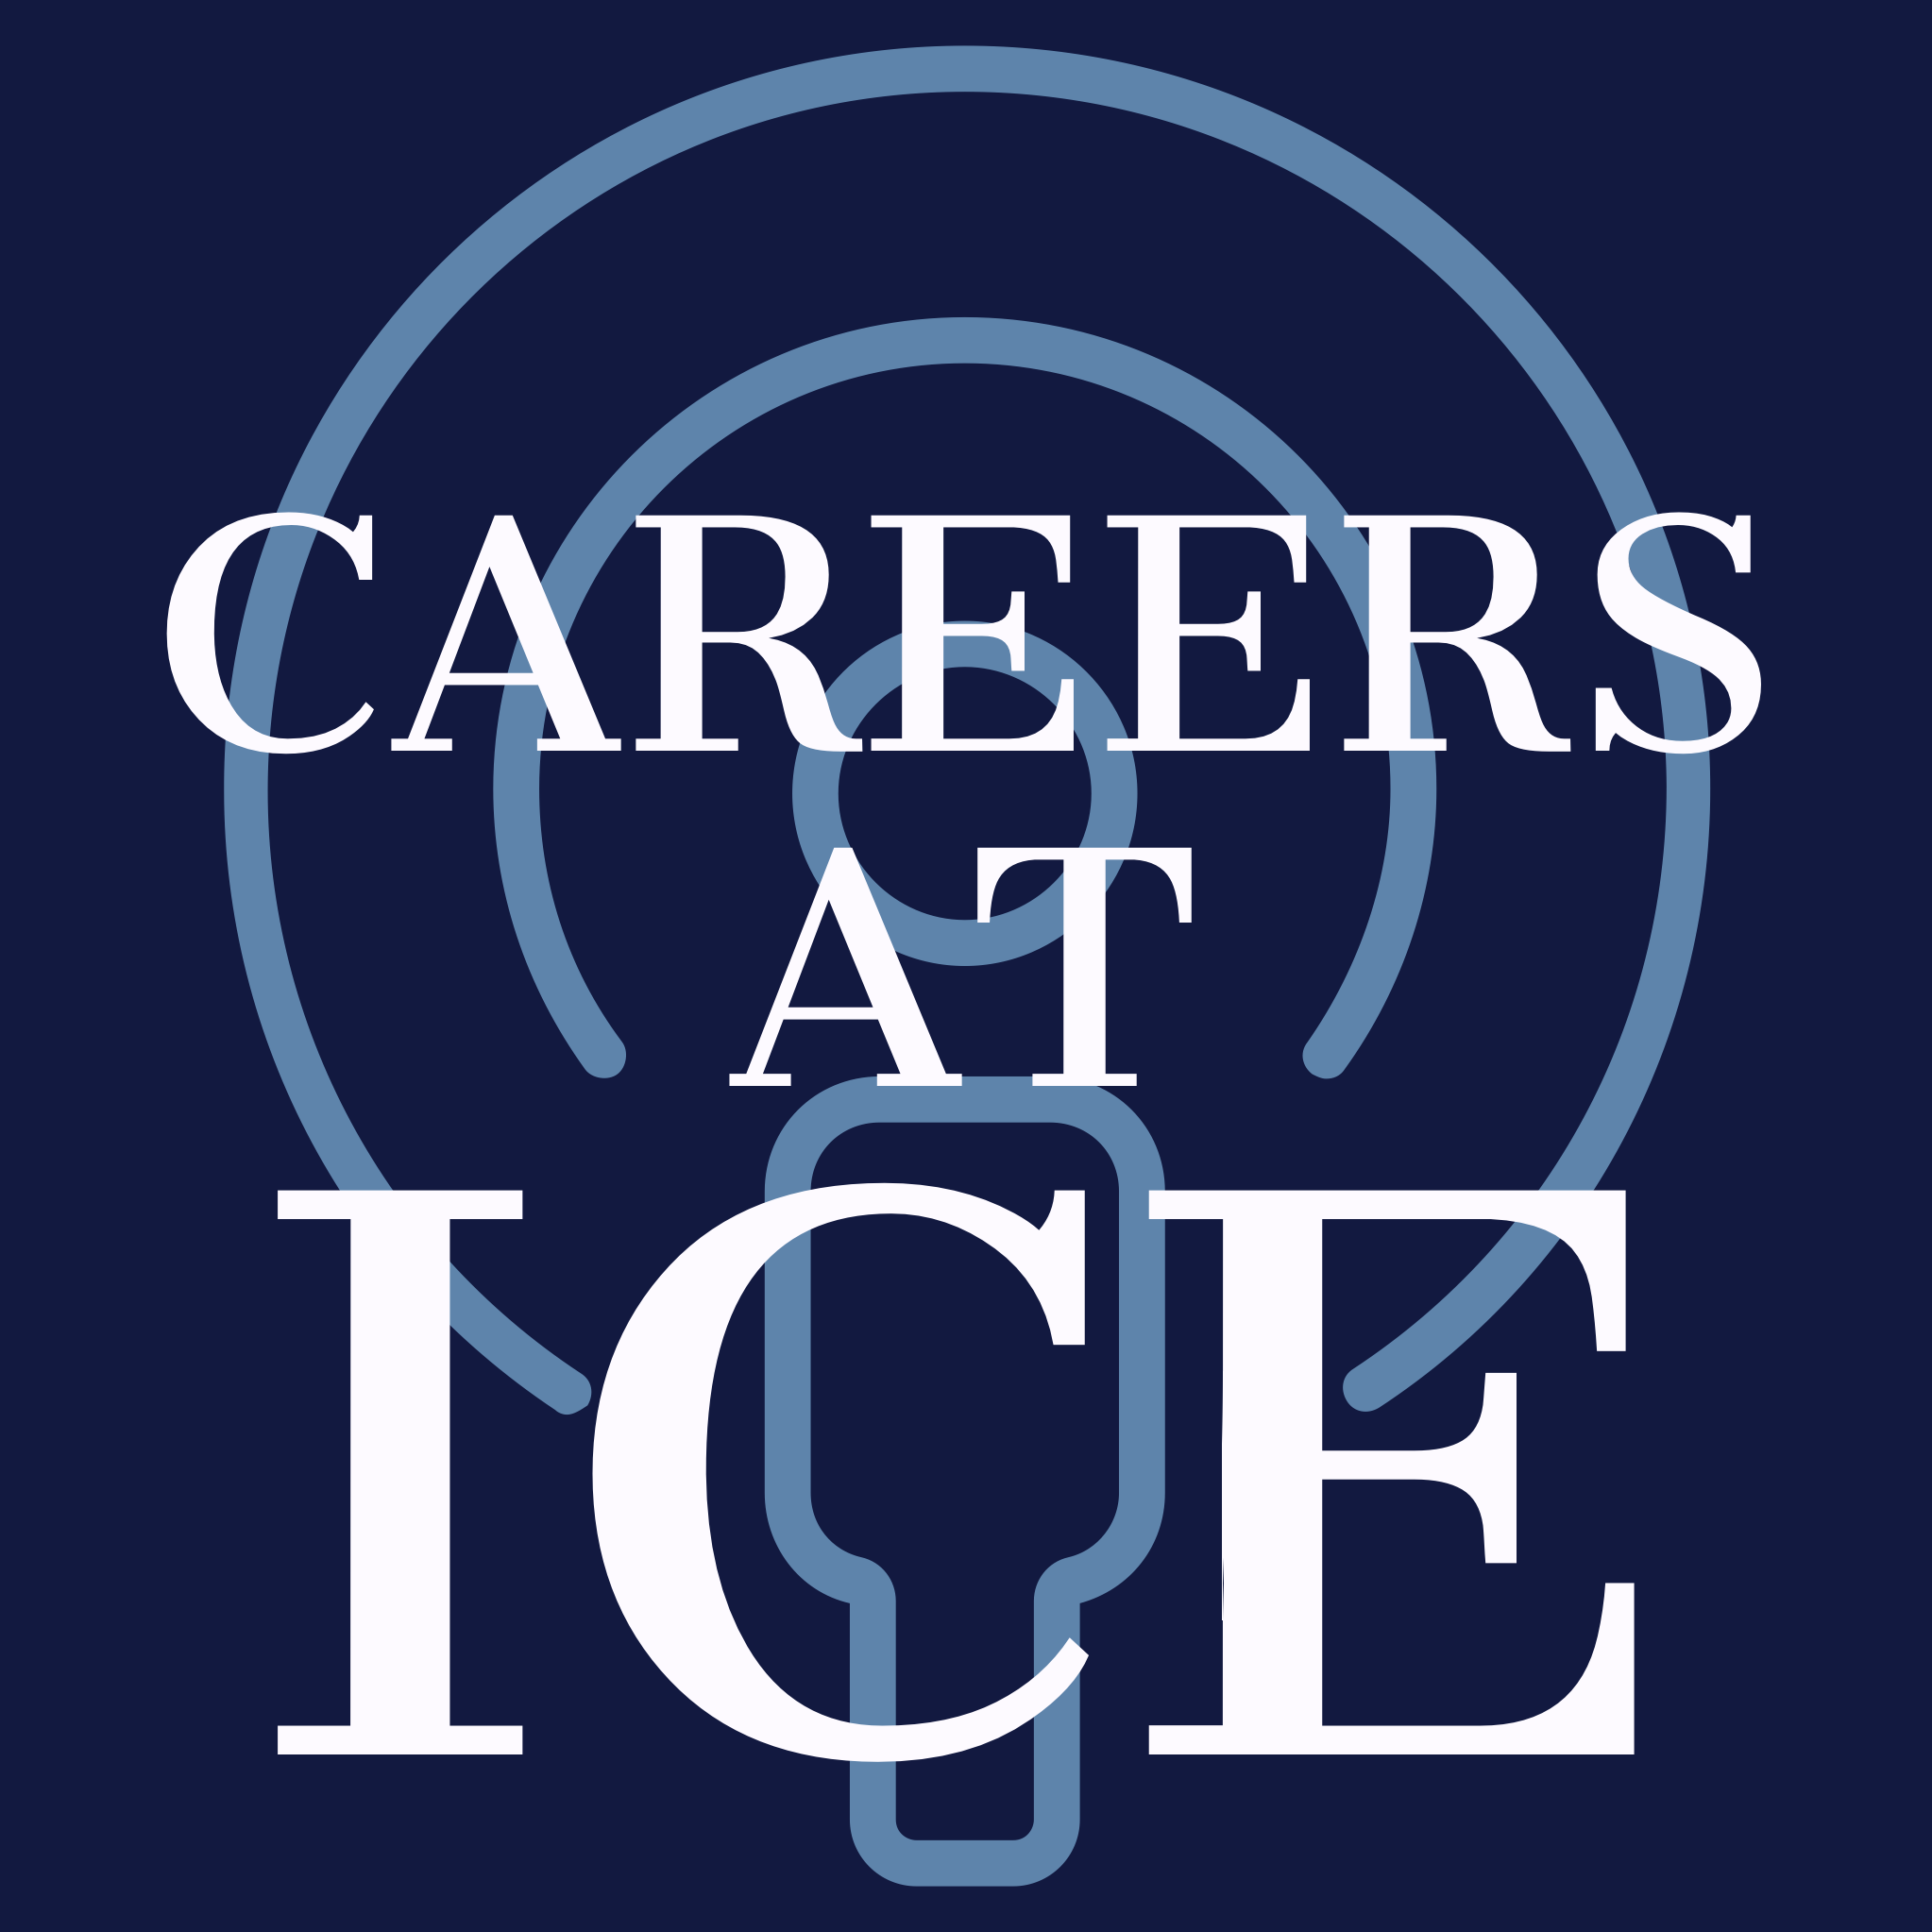 Careers at ICE